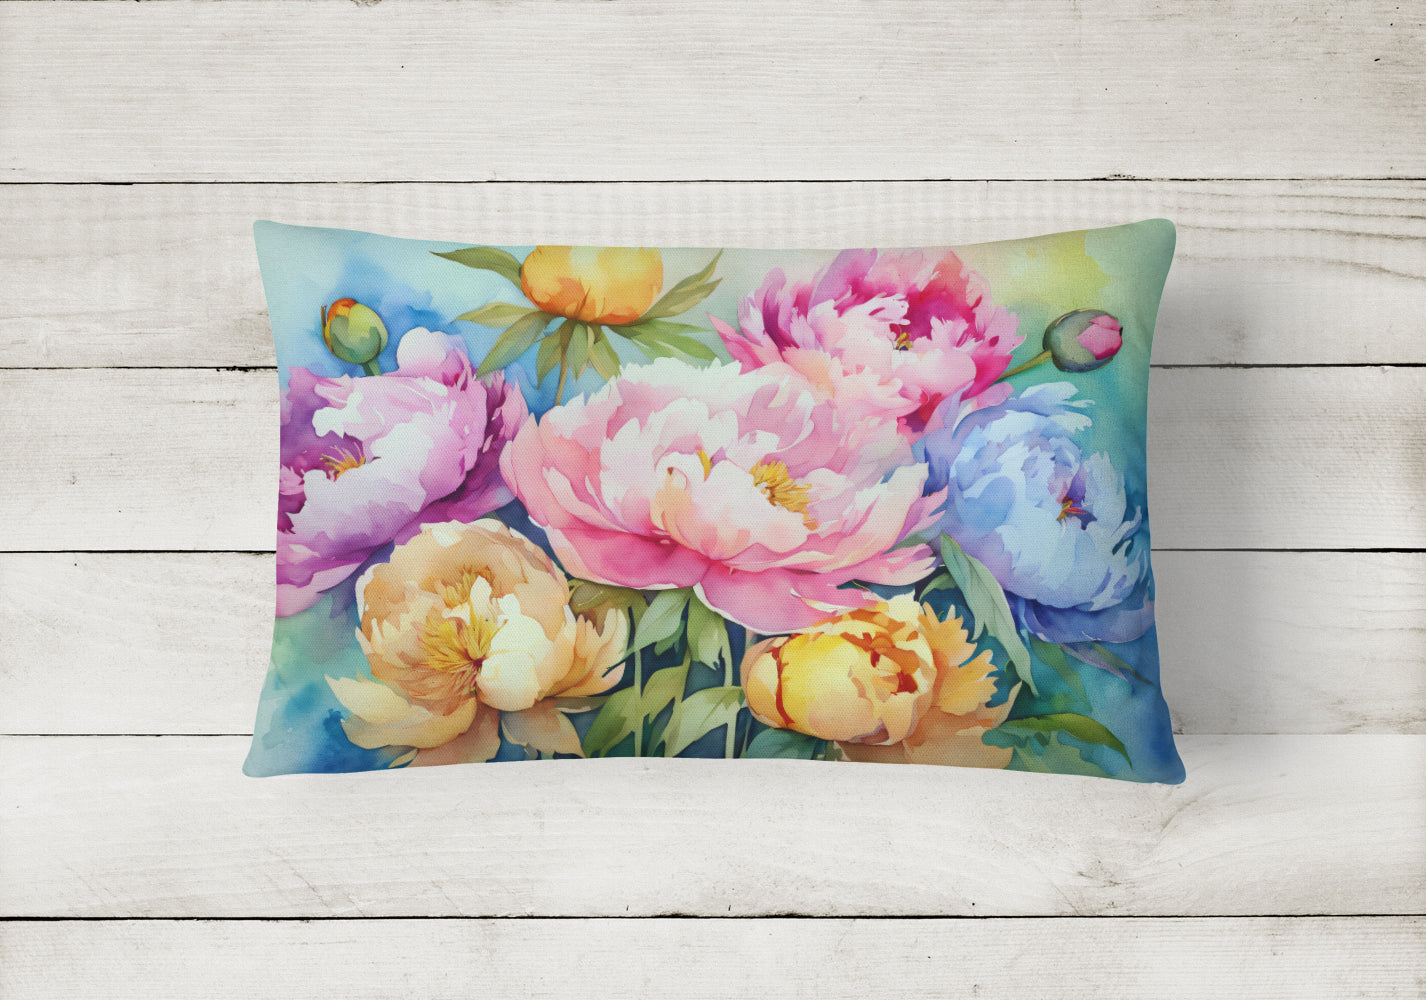 Buy this Peonies in Watercolor Fabric Decorative Pillow